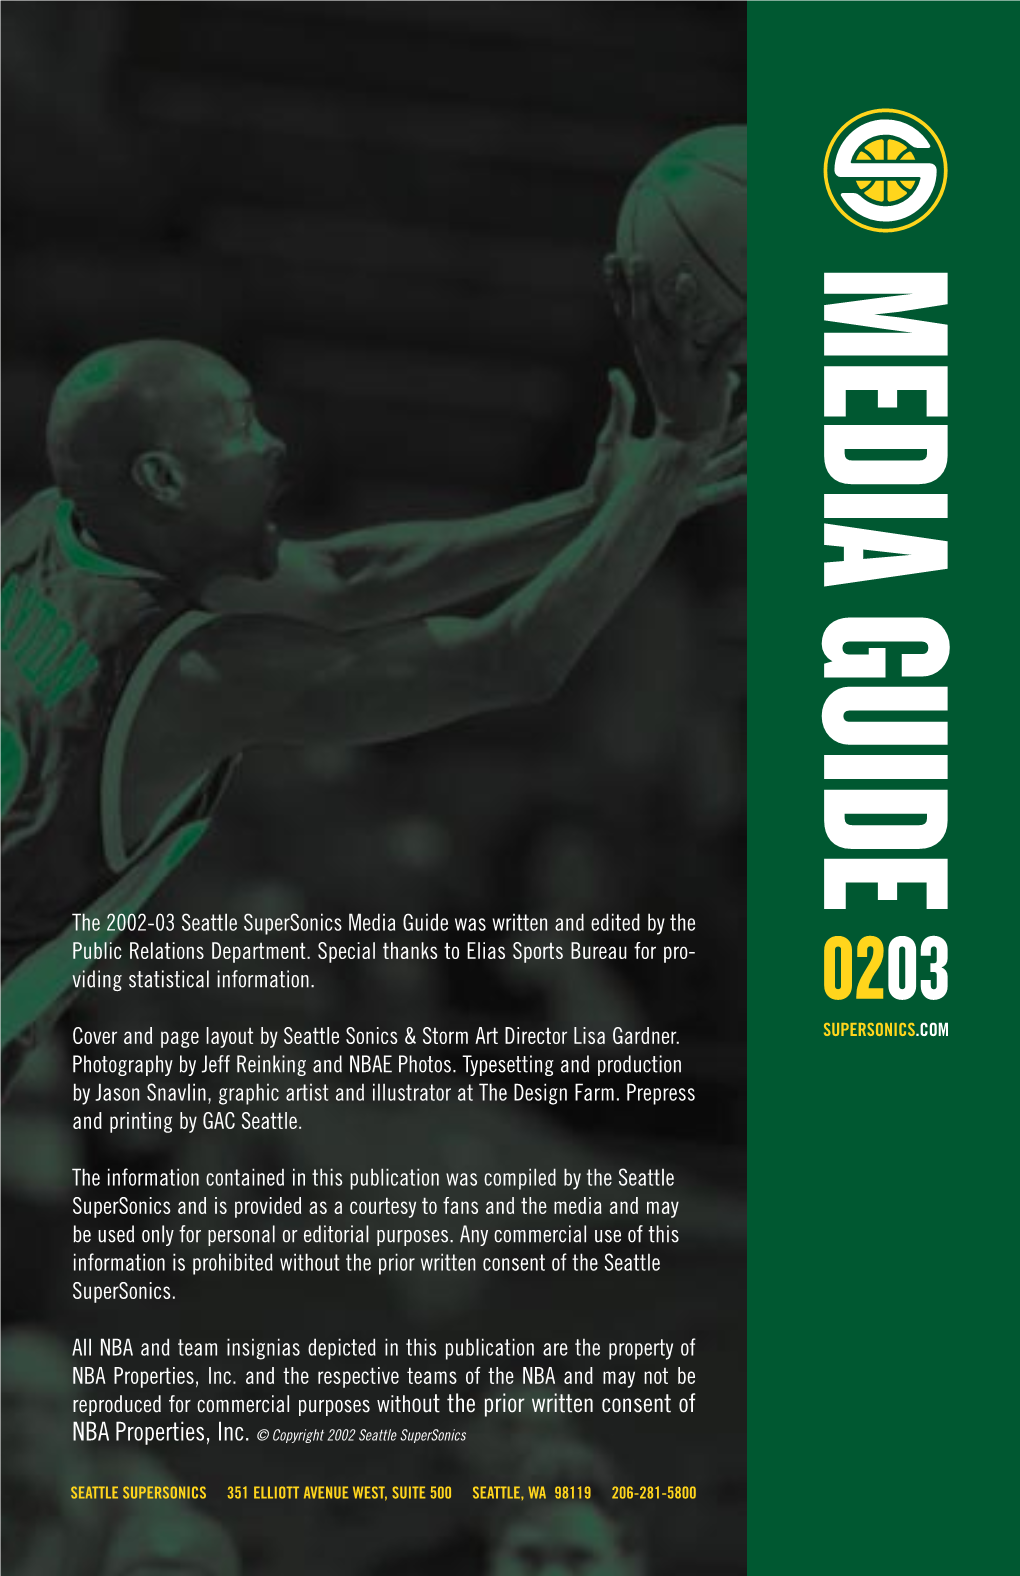 The 2002-03 Seattle Supersonics Media Guide Was Written and Edited by the Public Relations Department